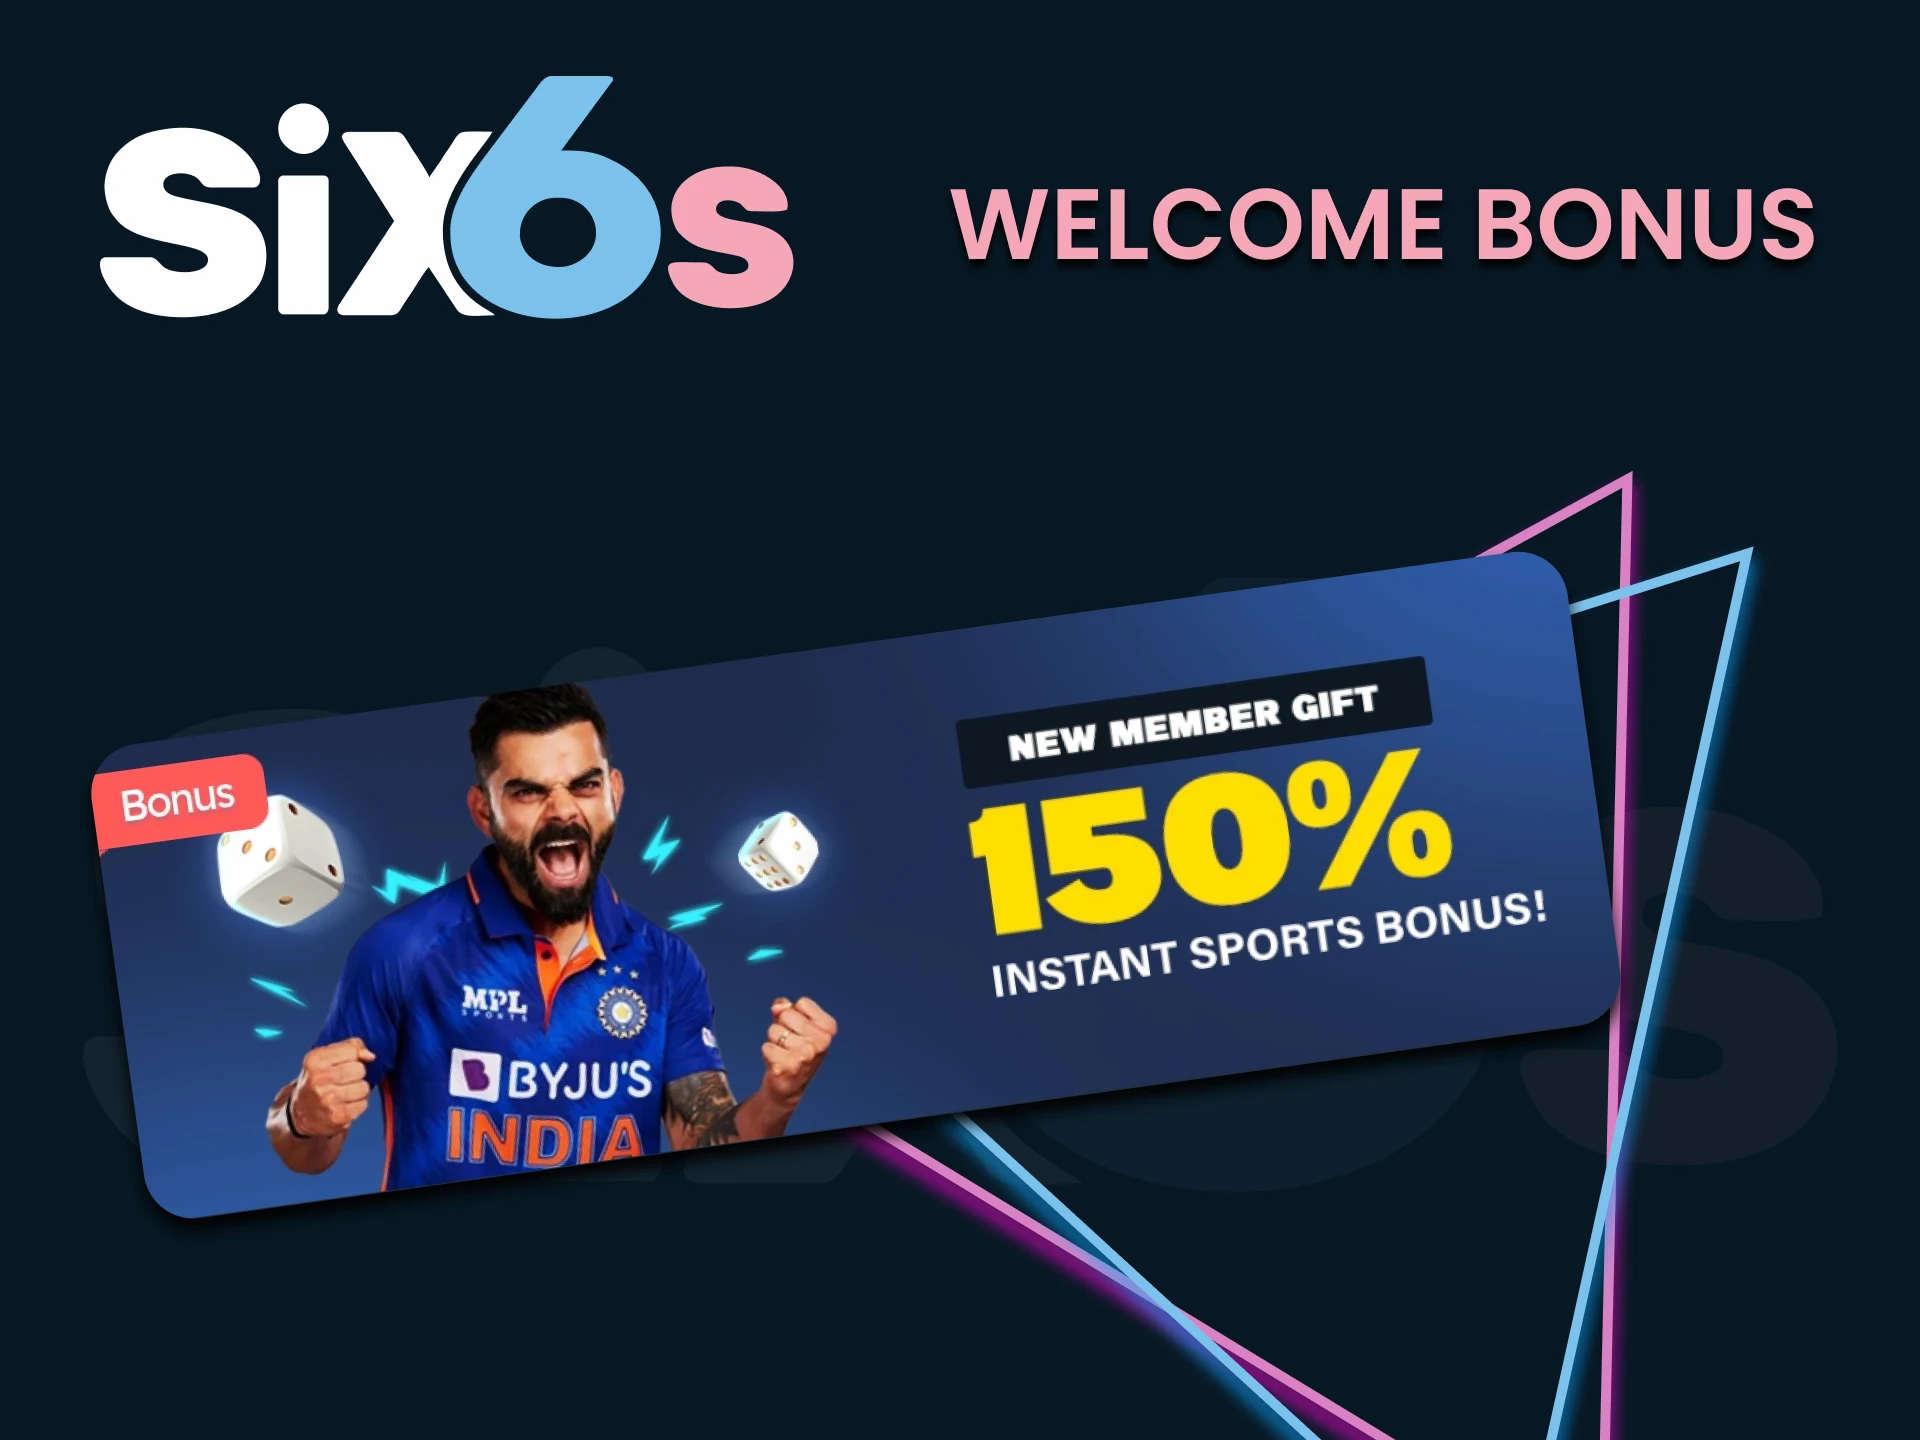 Get your tennis welcome bonus from six6s.